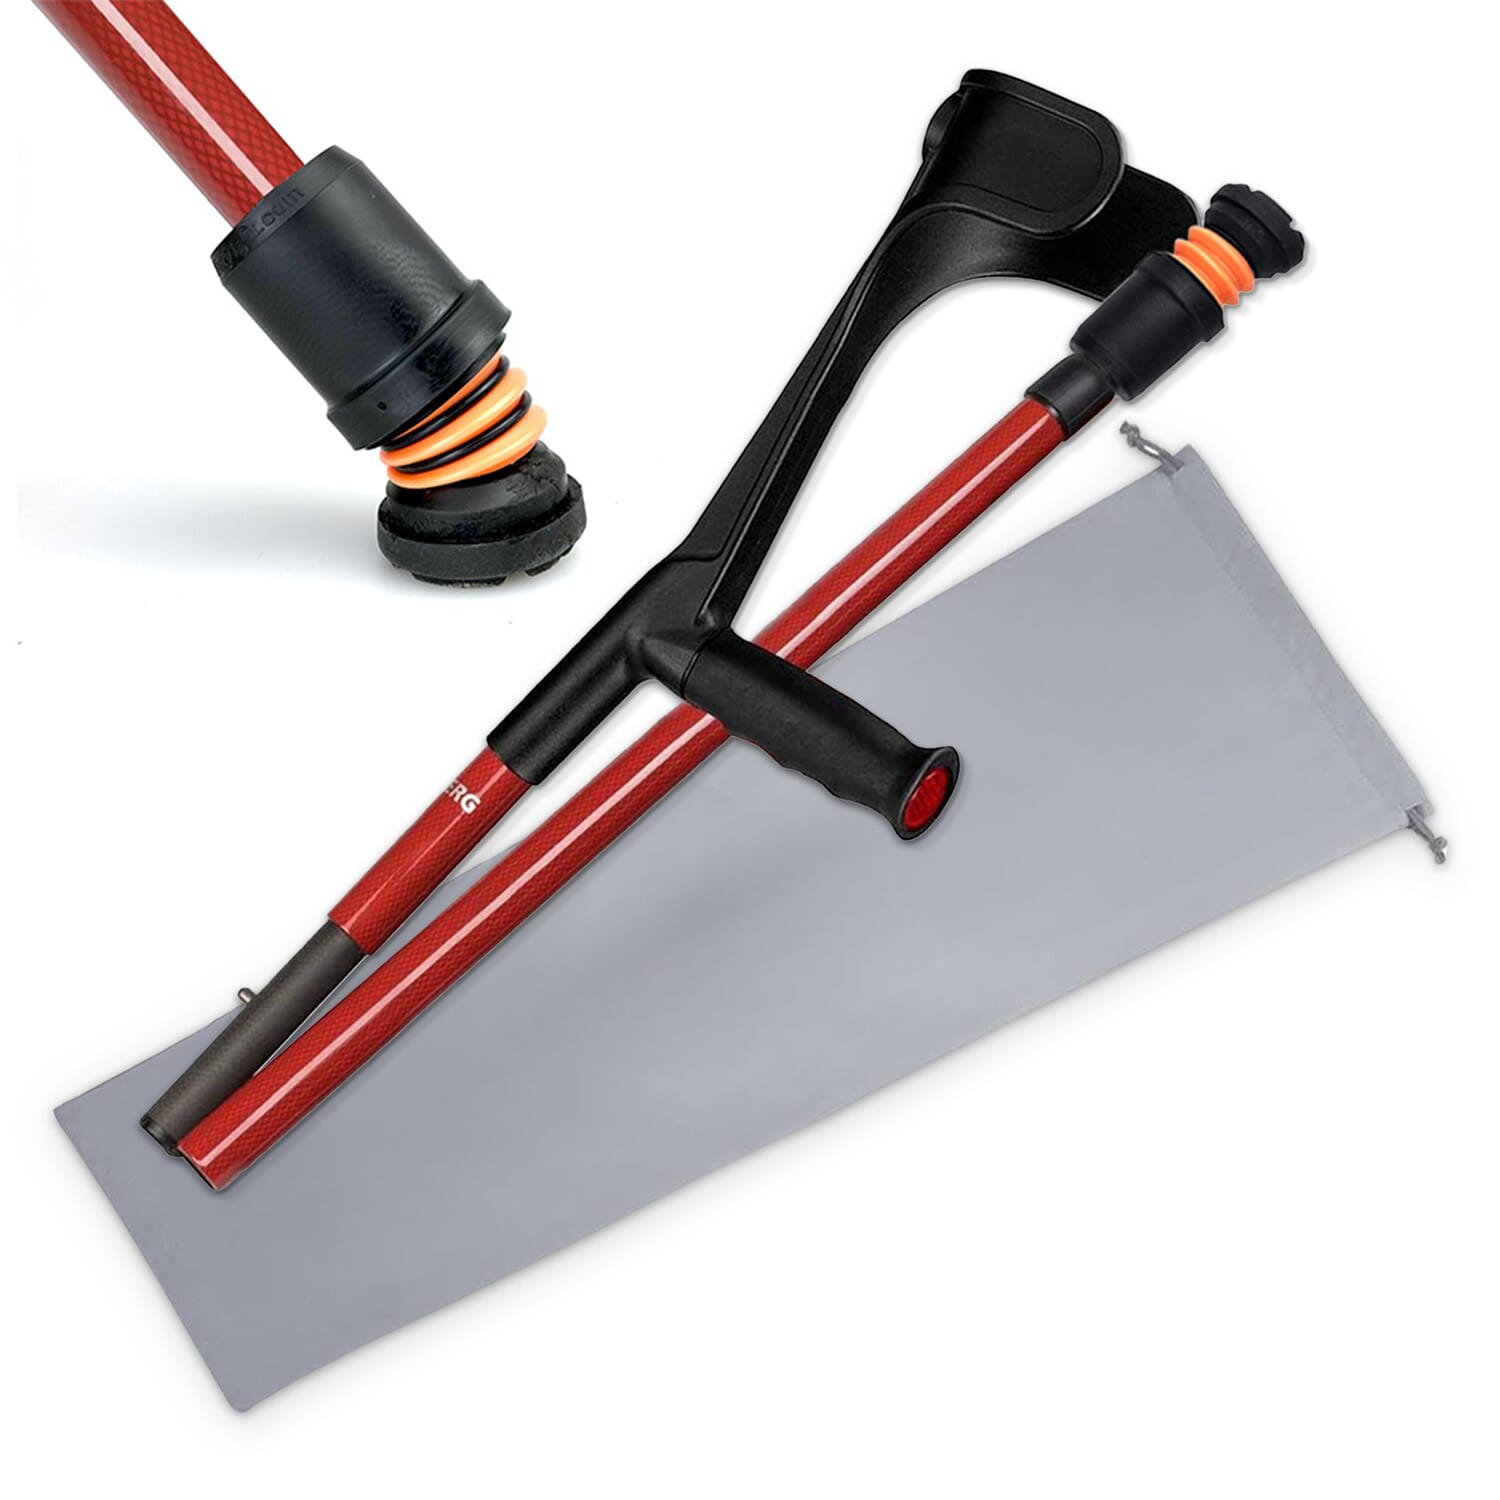 View Flexyfoot Carbon Fibre Folding Crutches Red Single information